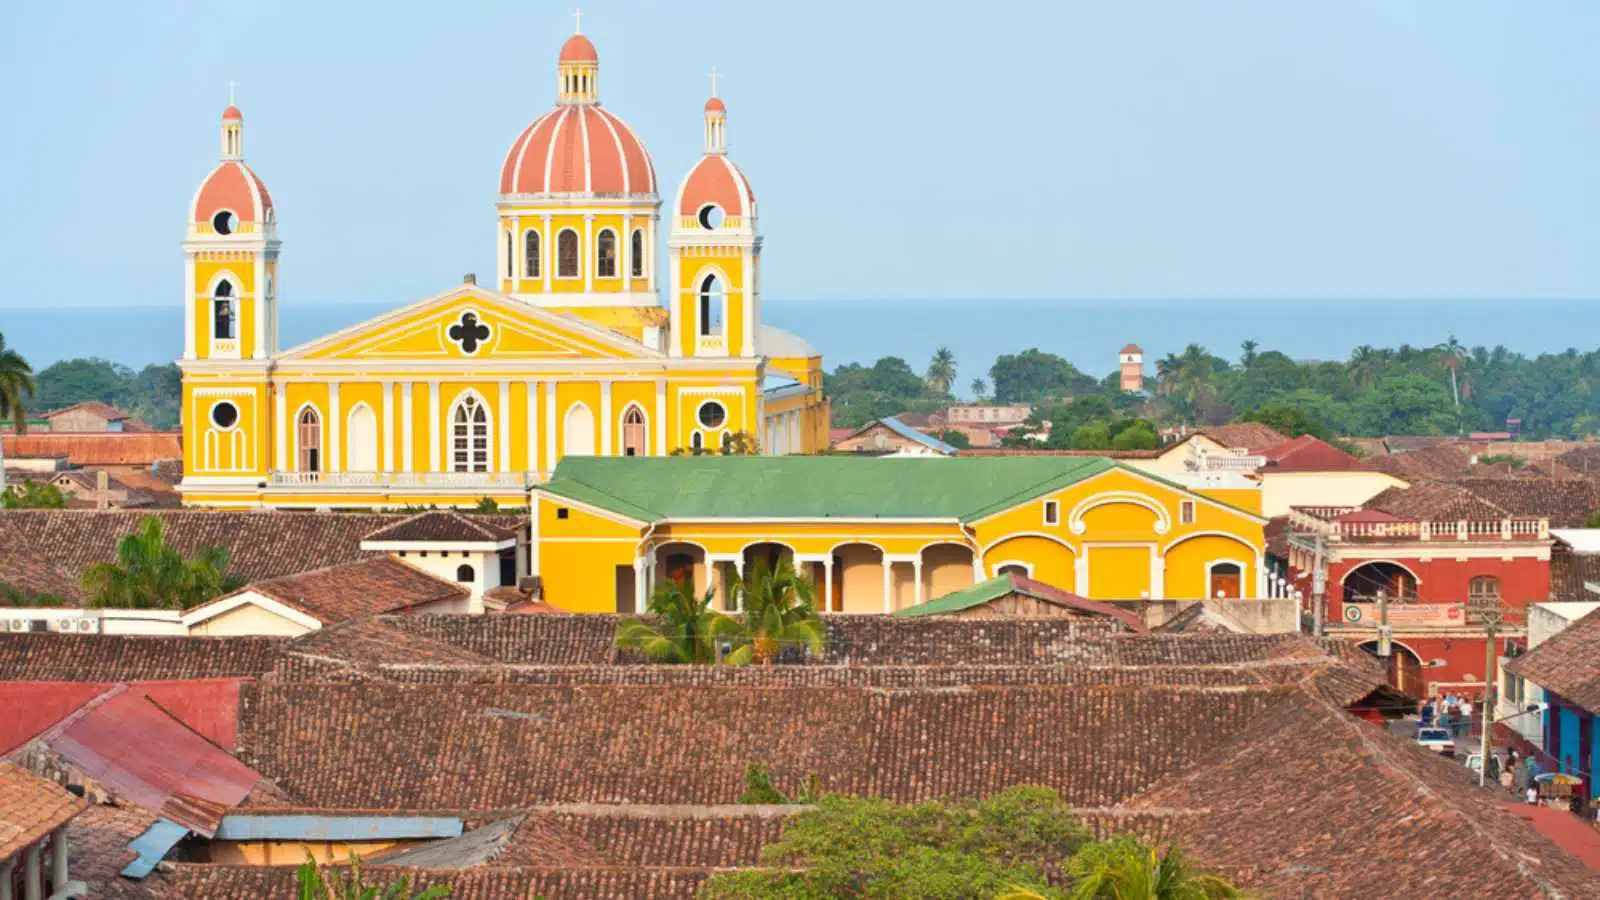 Granada cathedral and lake Nicaragua on the background, Nicaragua.